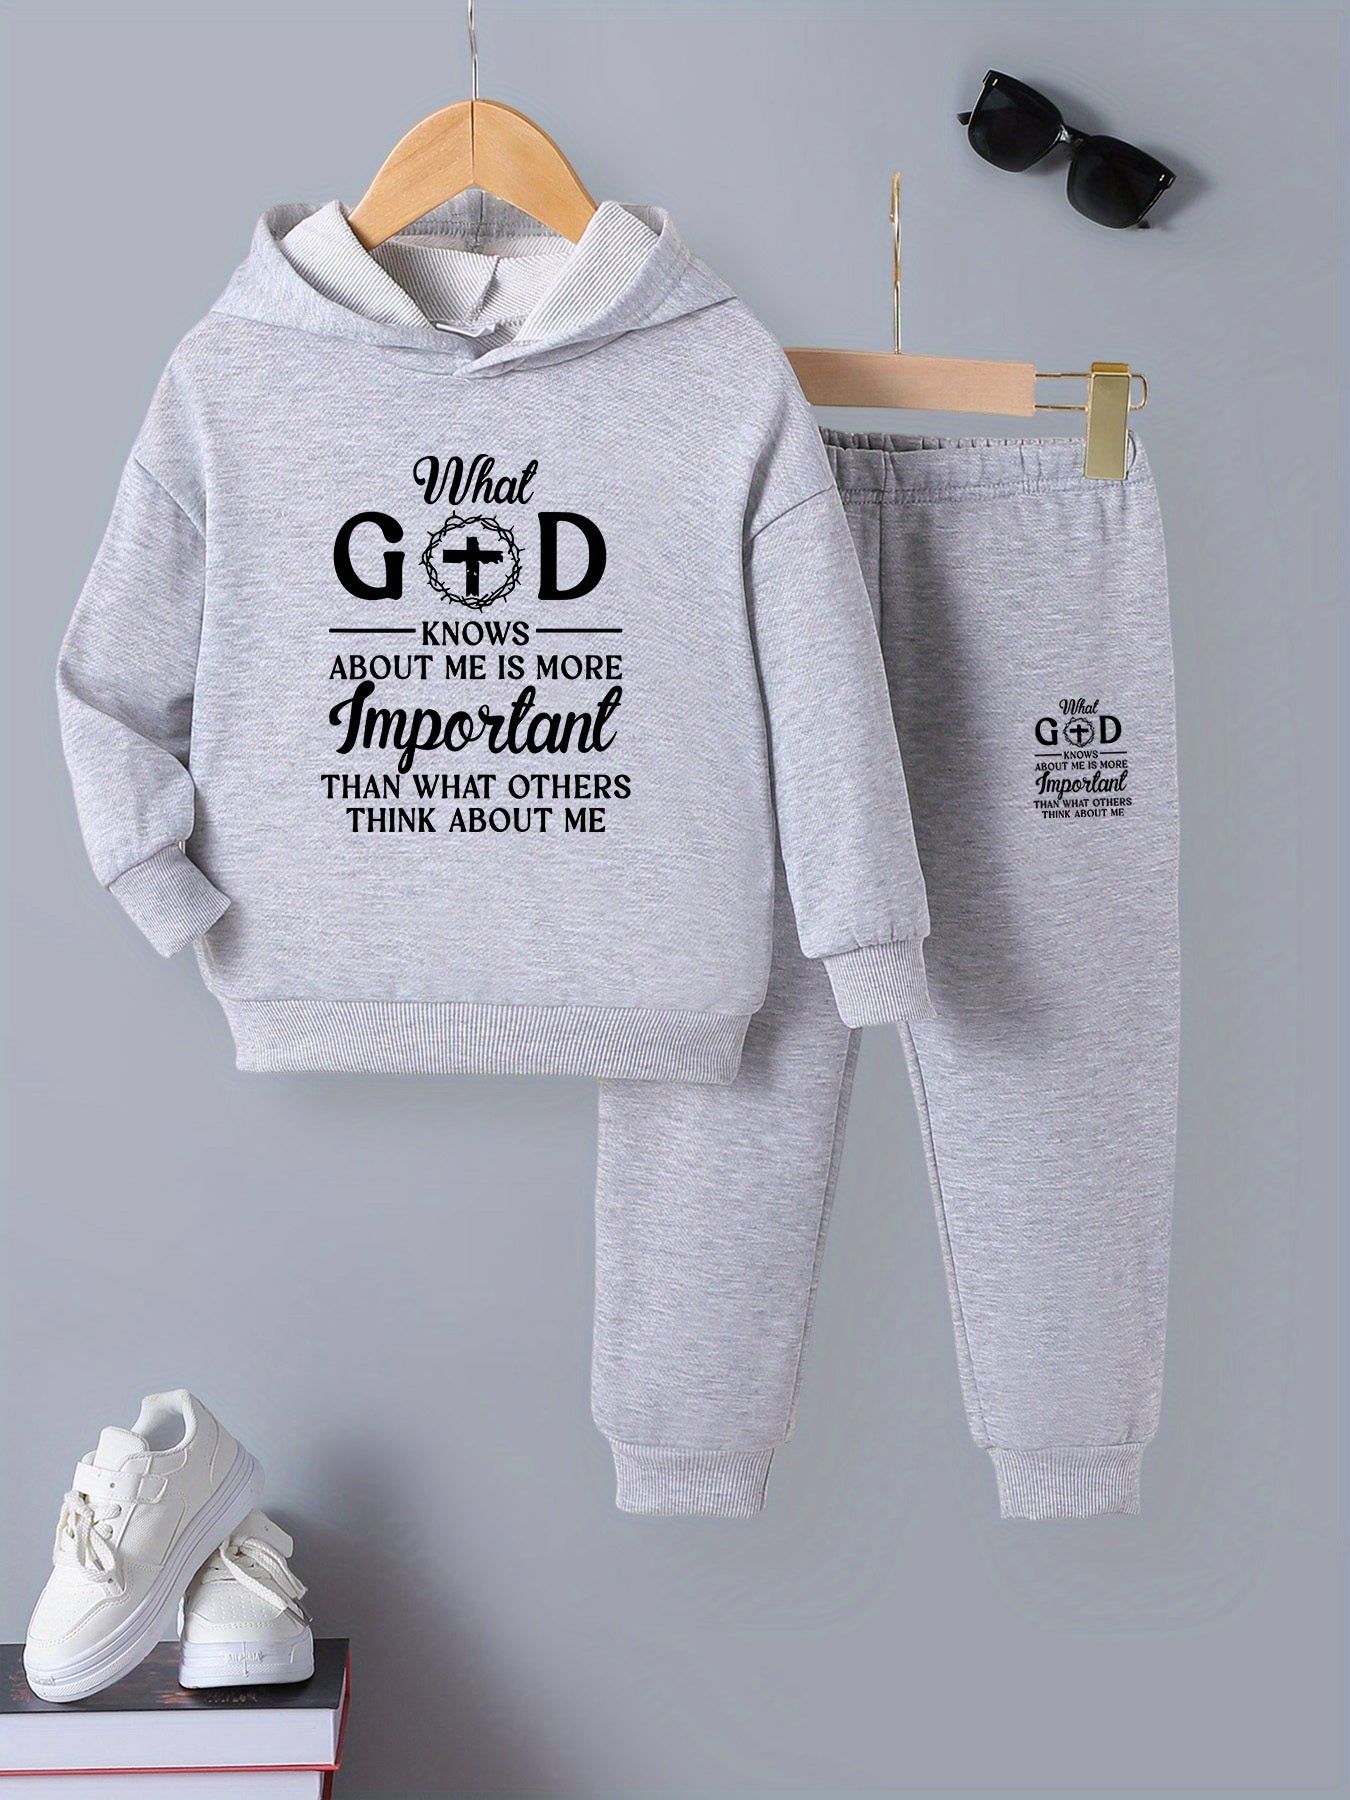 What God Knows About Me Is More Important Than What Others Think About Me Youth Christian Casual Outfit claimedbygoddesigns